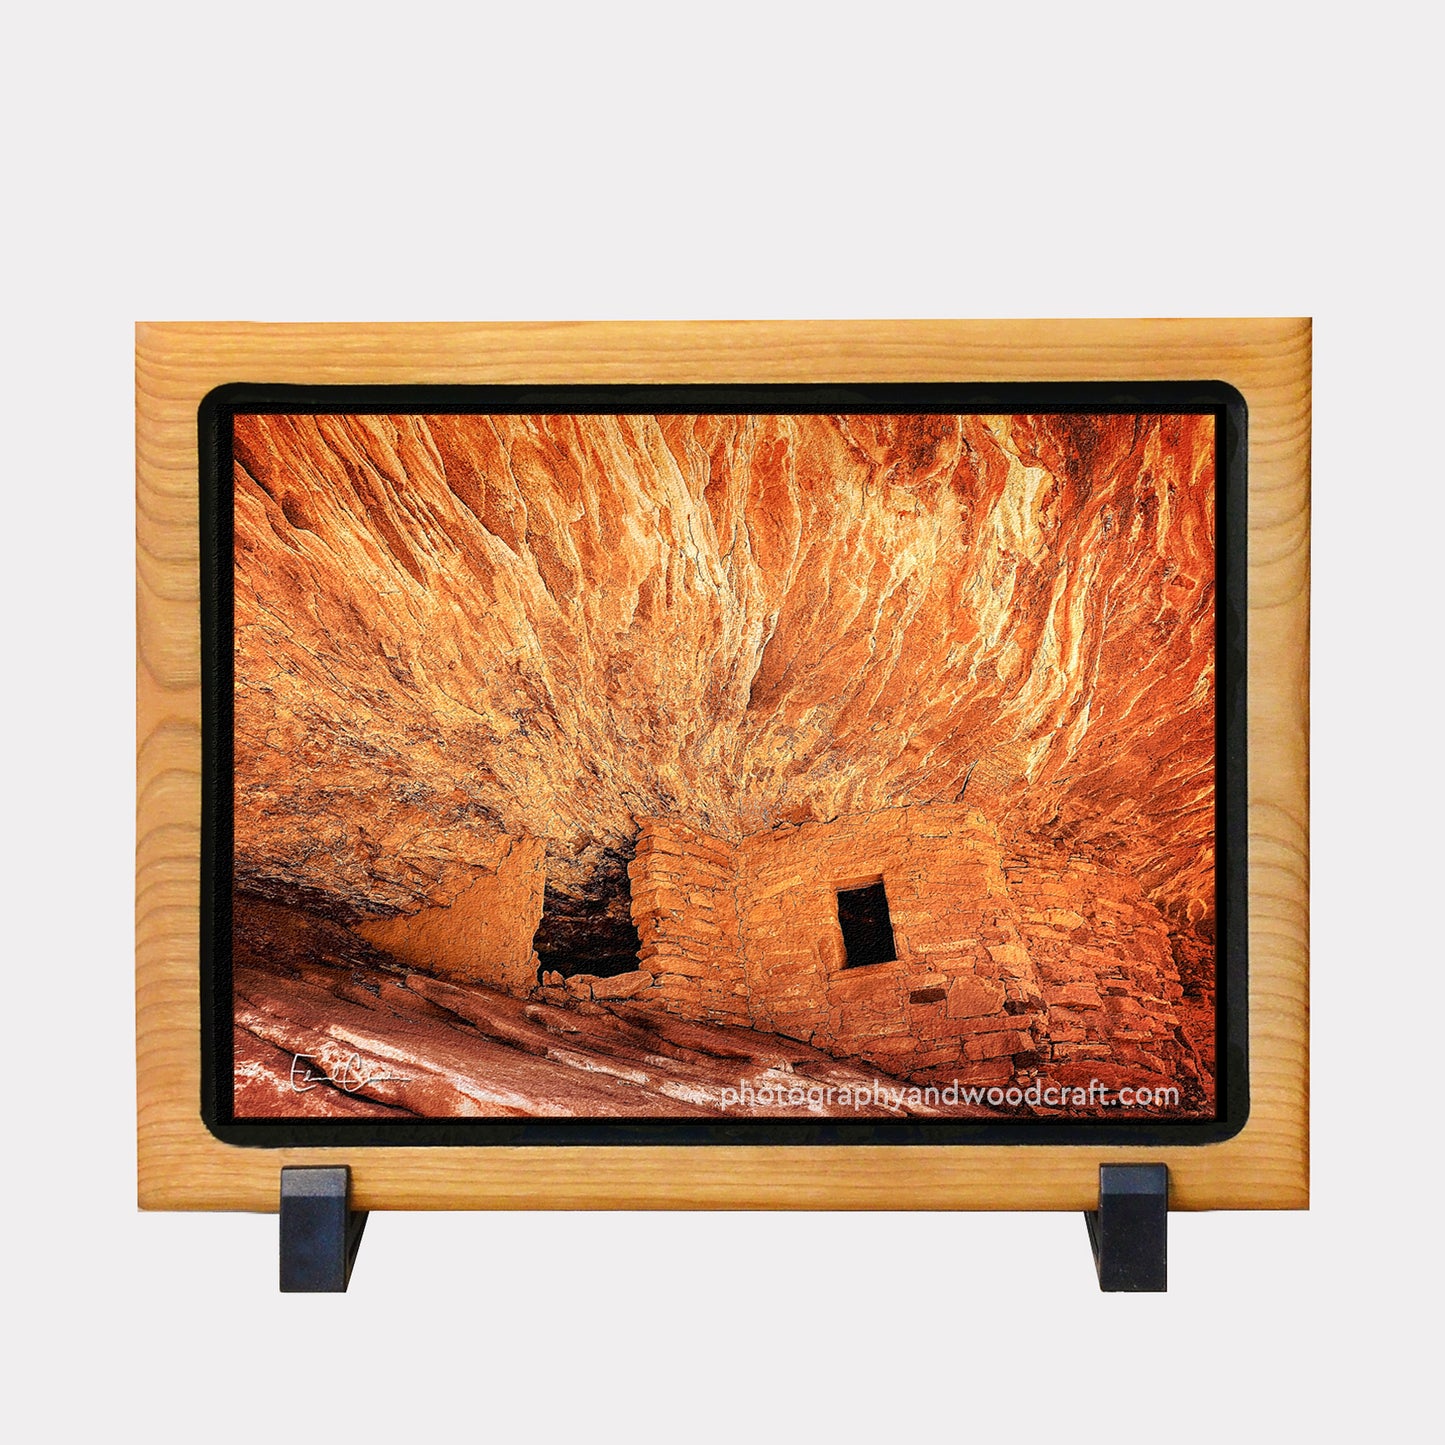 5" x 7" House on Fire ruins. Canvas Print in Solid Wood Floating Frame